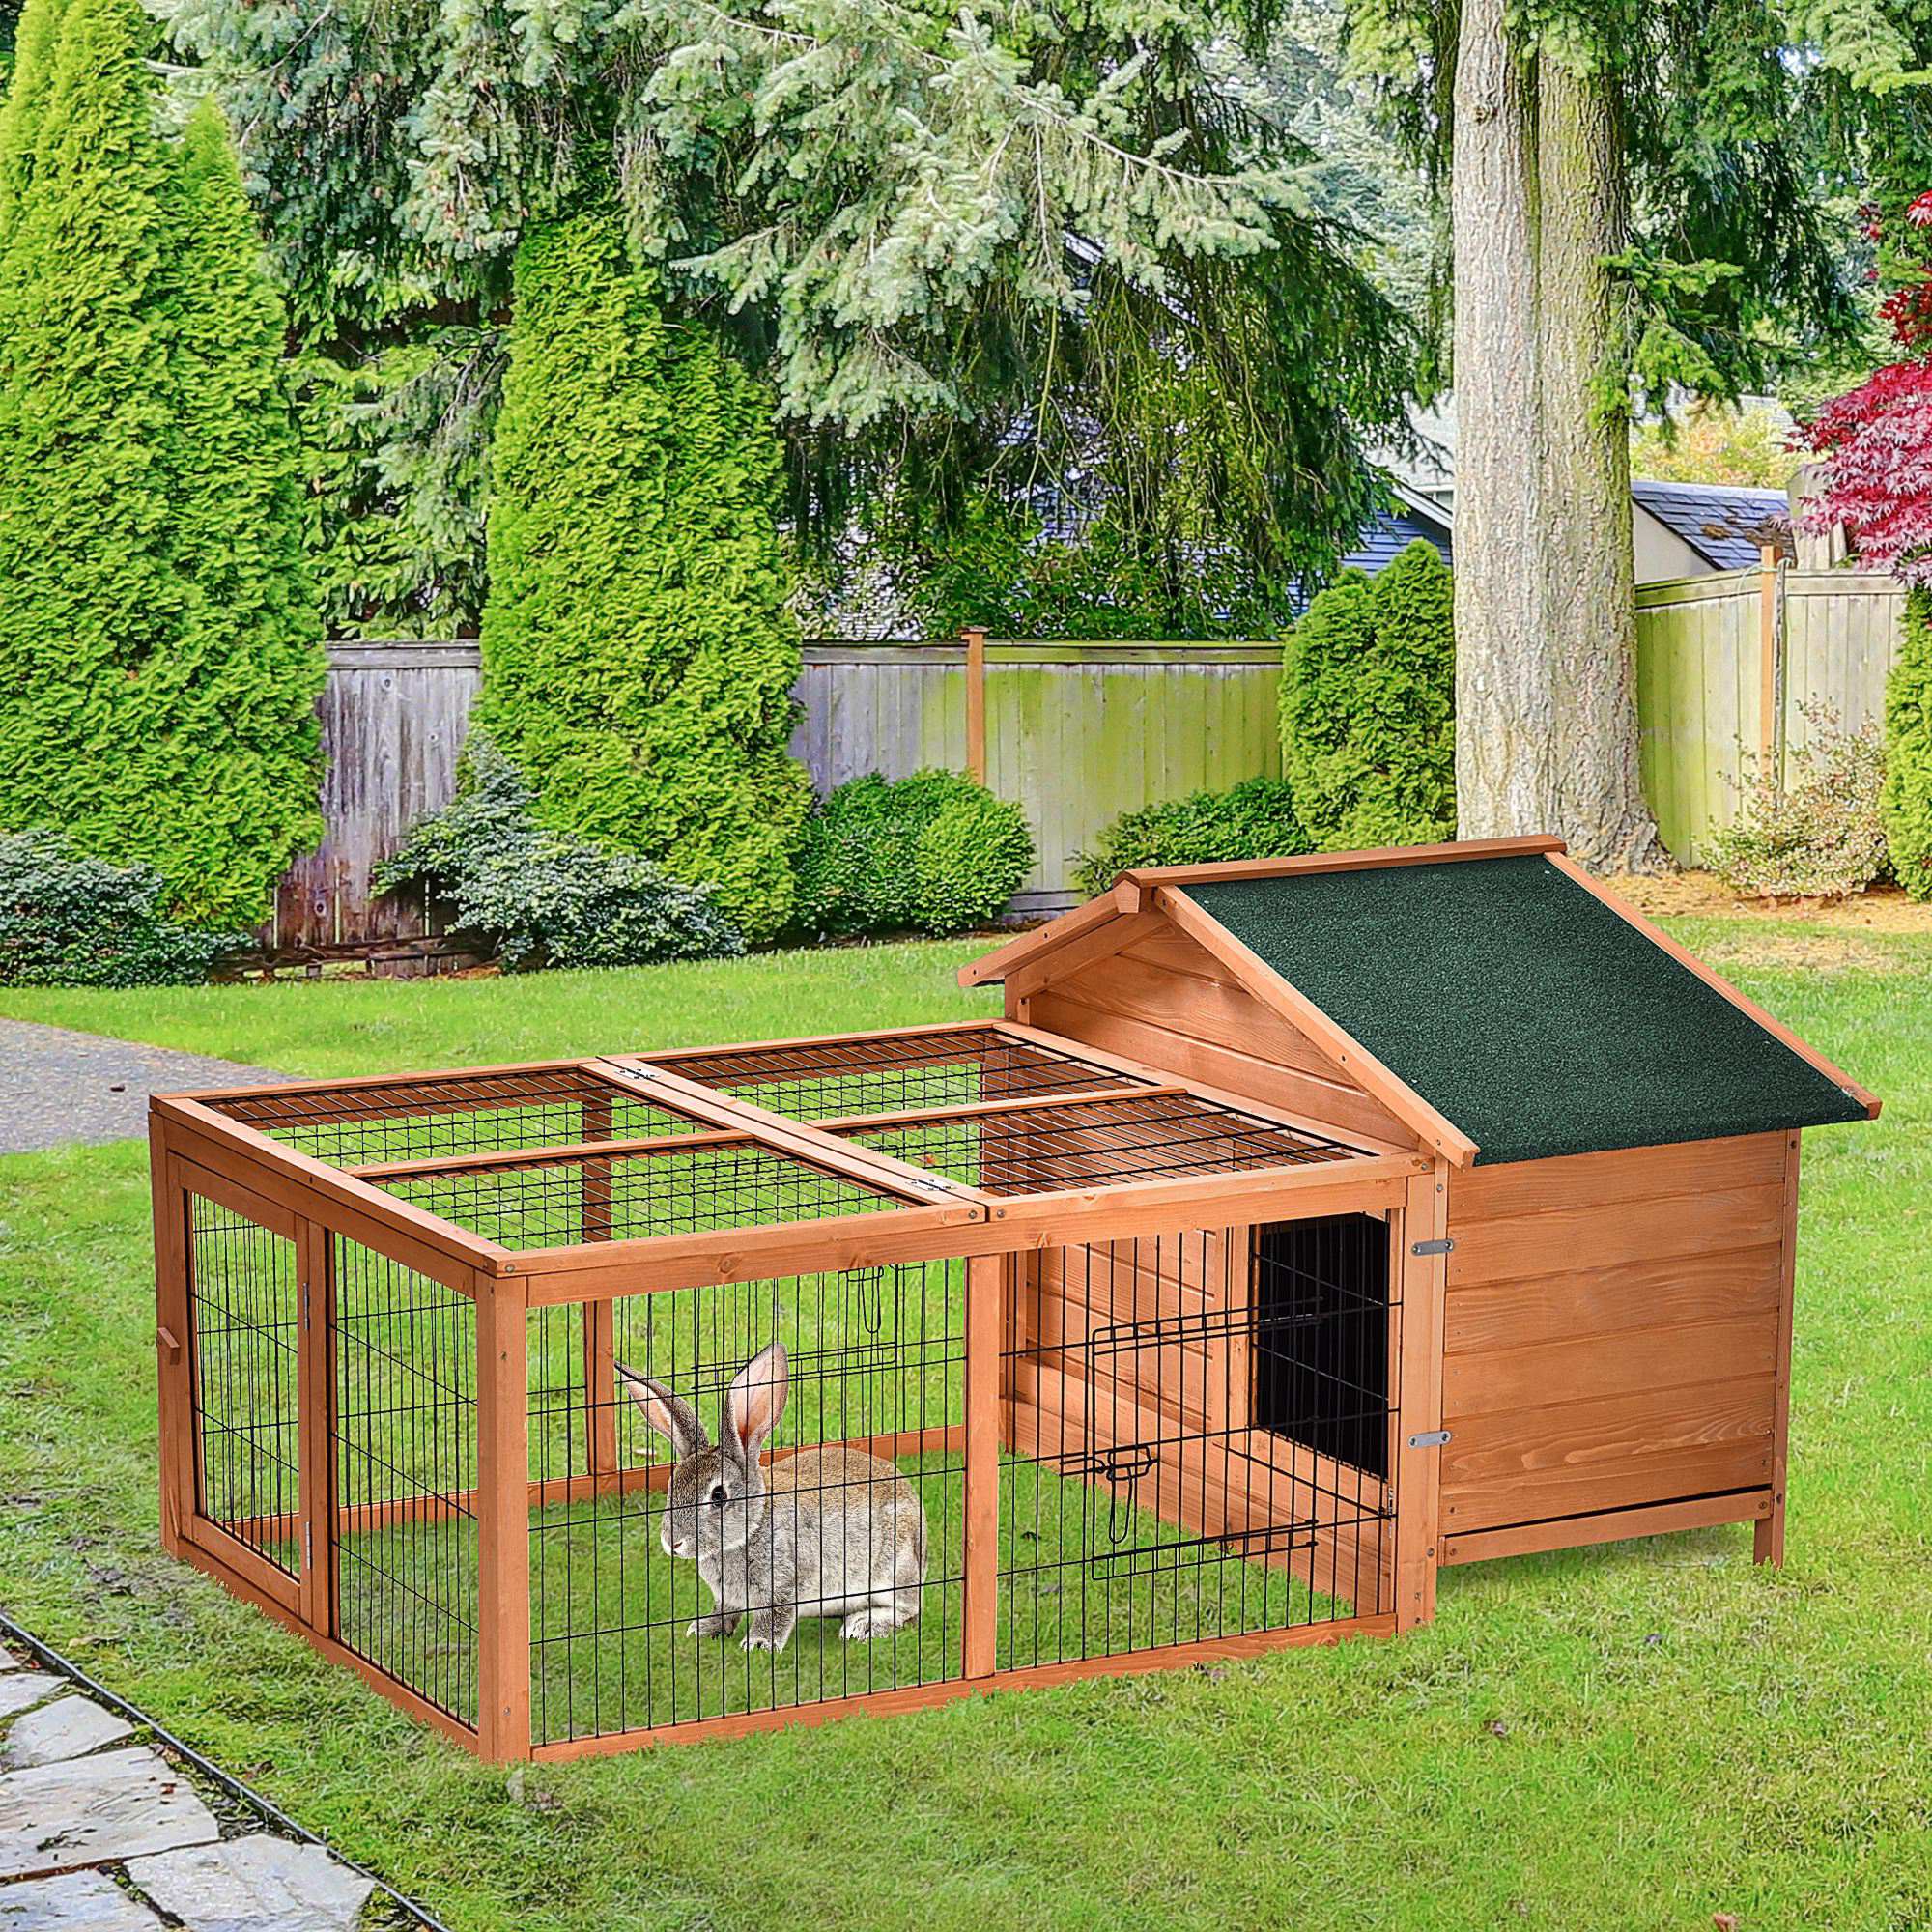 Wooden Rabbit Hutch Outdoor, Guinea Pig Hutch, Detachable Pet House Animal Cage with Openable Run & Roof Lockable Door Slide-out Tray 146 x 95 x 69cm, PawHut,